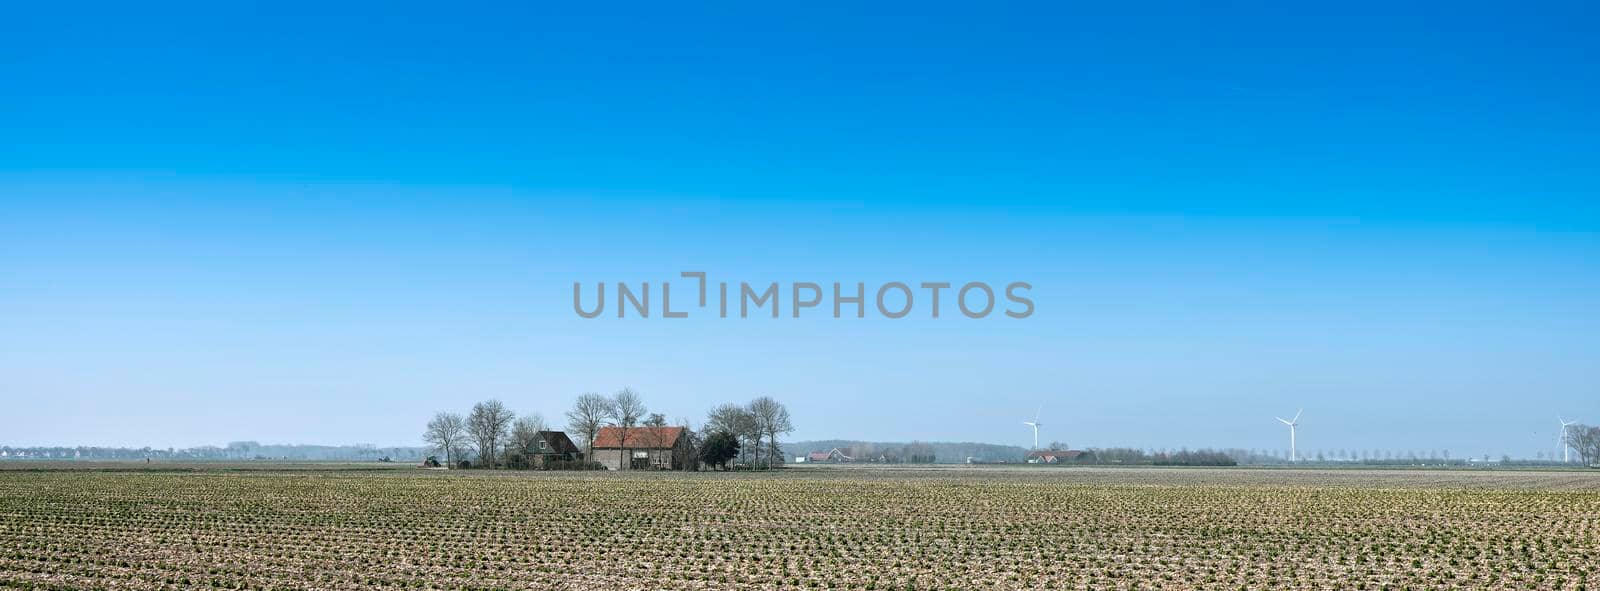 house and agricultural fields in dutch province of zeeland under blue sky by ahavelaar